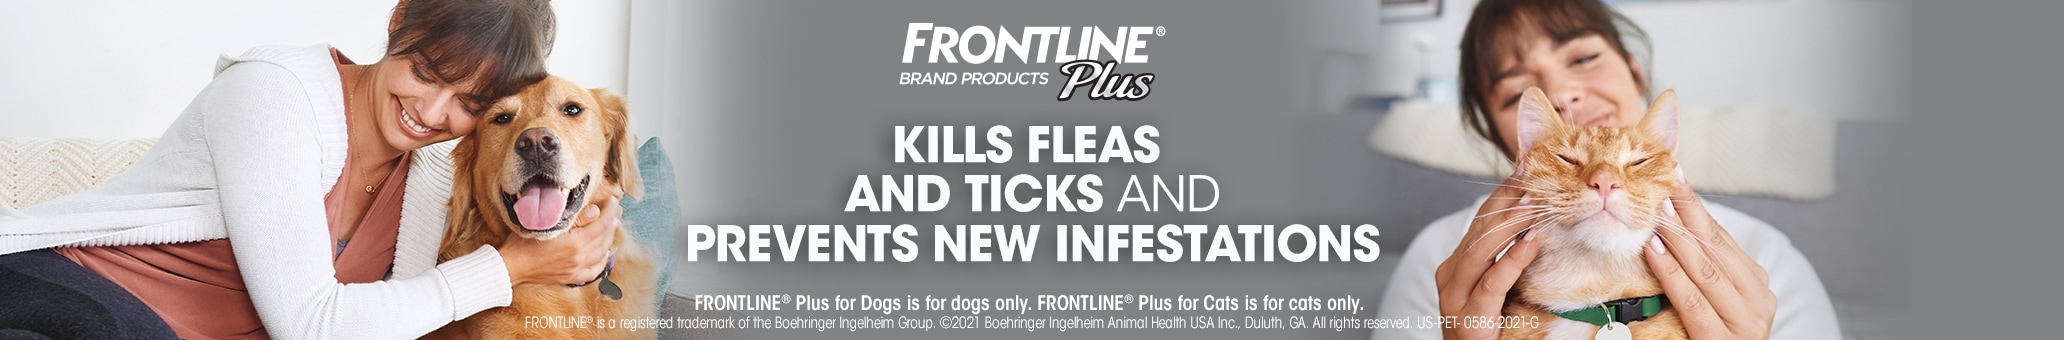 Frontline Plus. Frontline Plus for Dogs is for dogs only. Frontline Plus for Cats is for cats only.